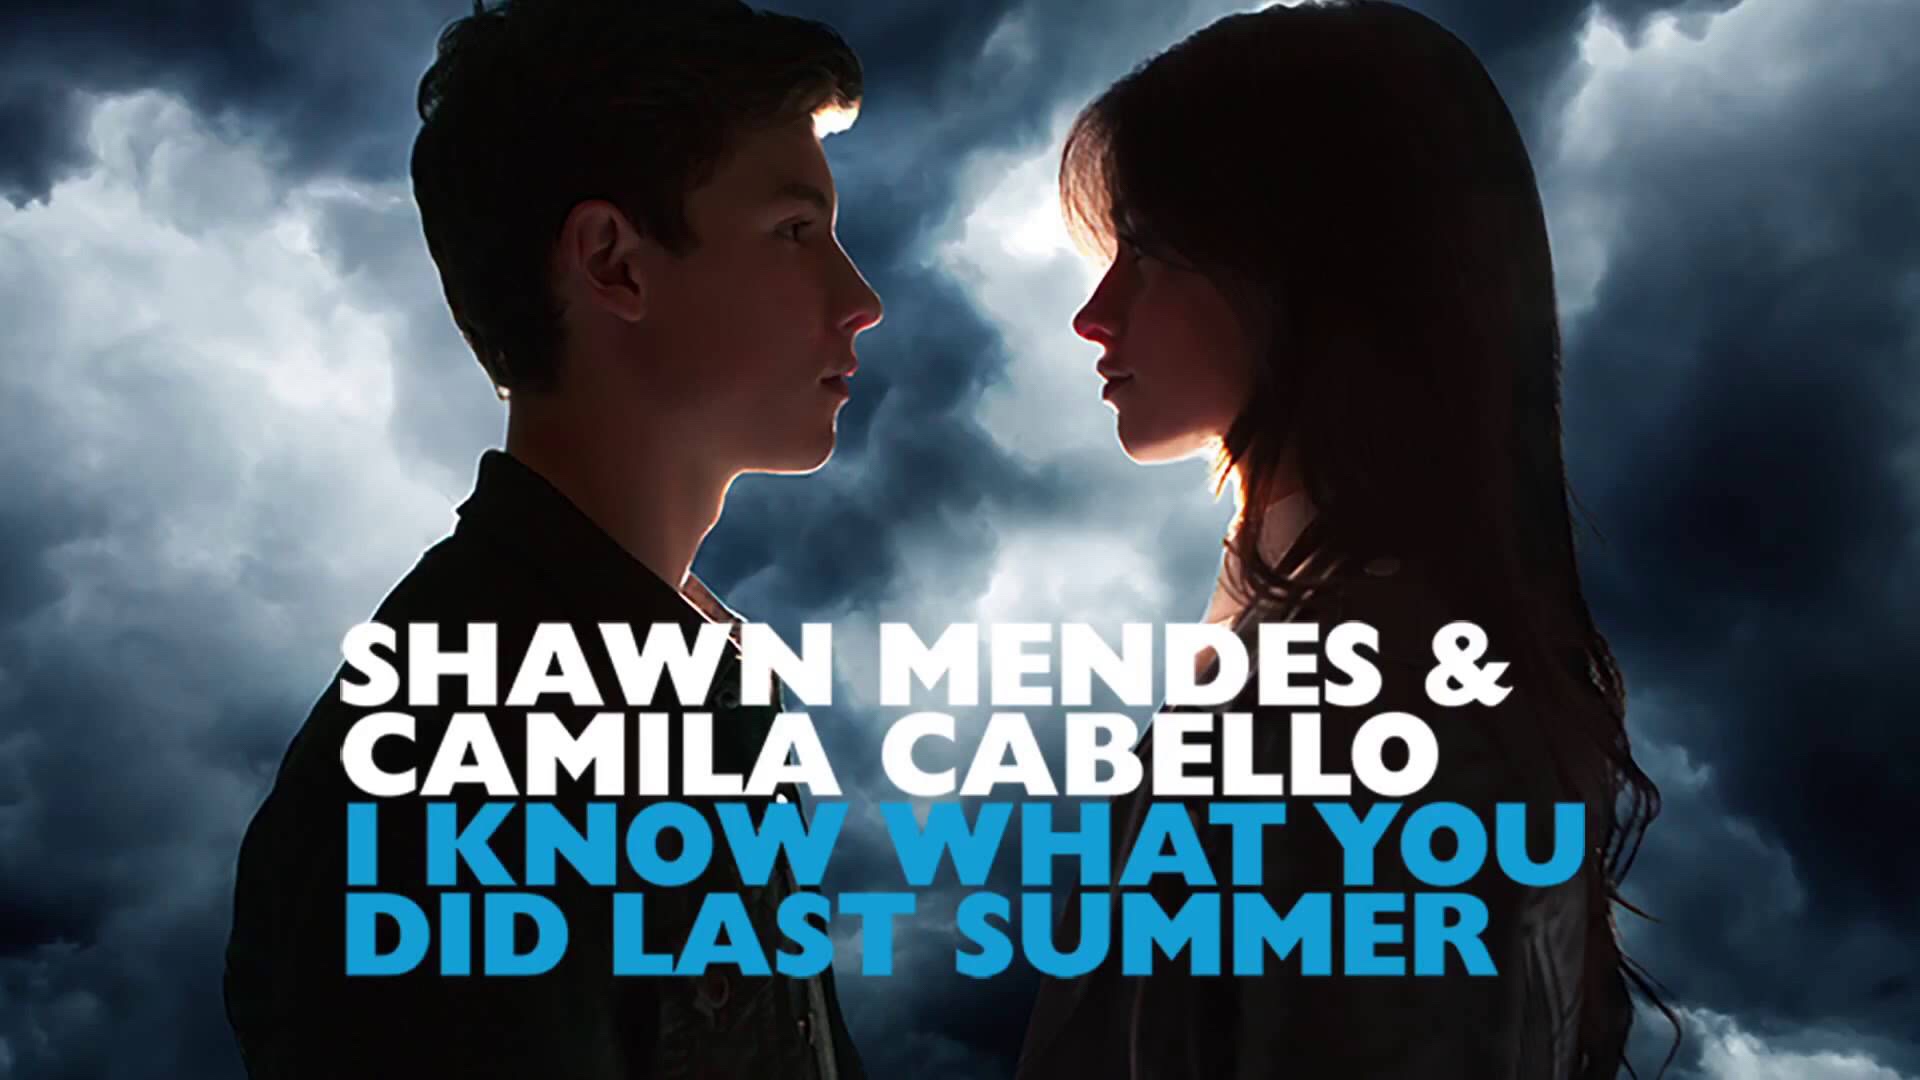 What did you do this summer. Camila Cabello last Summer. Shawn Mendes & Camila Cabello - i know what you did last Summer. I know what you did last Summer песня. I know what you did.